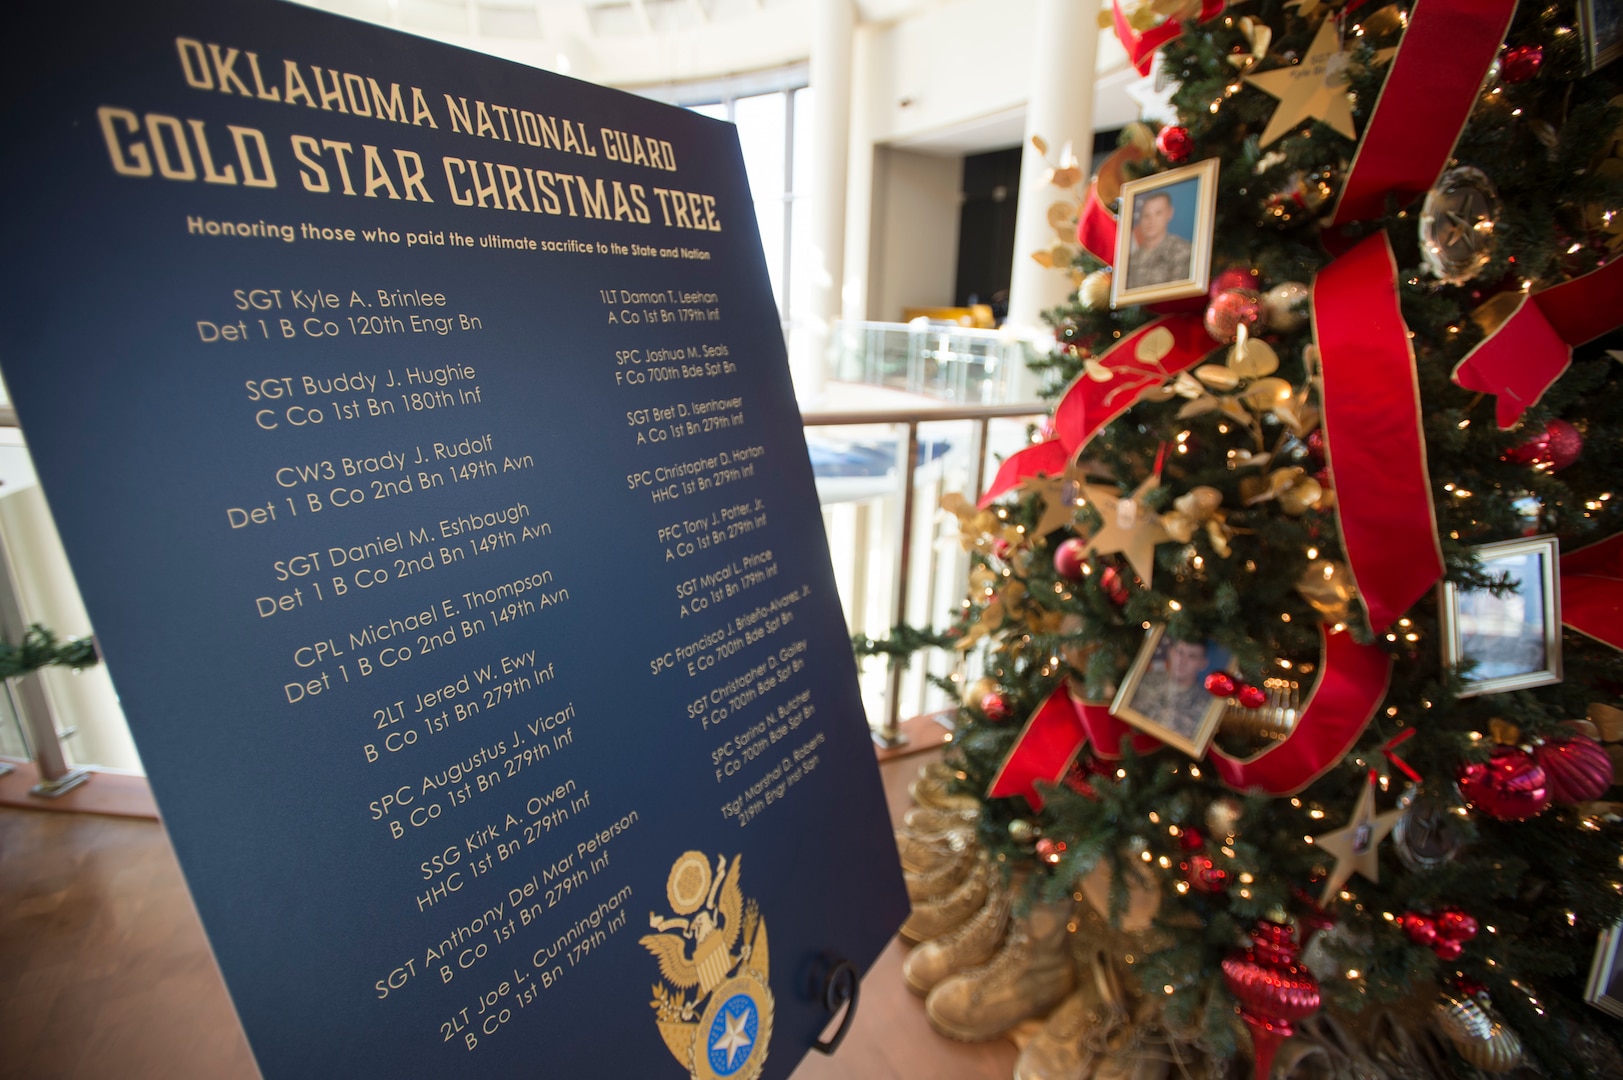 IMAGE: The Oklahoma National Guard Gold Star Tree stands in the 3rd Floor atrium of the Oklahoma History Center in Oklahoma City, Nov. 25, 2020.

The Oklahoma National Guard Gold Star Tree honors the 20 Oklahoma National Guard members who died while serving overseas since 9/11. The tree is decorated with photos and the names of the 19 Army National Guard Soldiers and One Air National Guard Airman who paid the ultimate sacrifice while serving our nation. (Oklahoma National Guard photo by Anthony Jones)